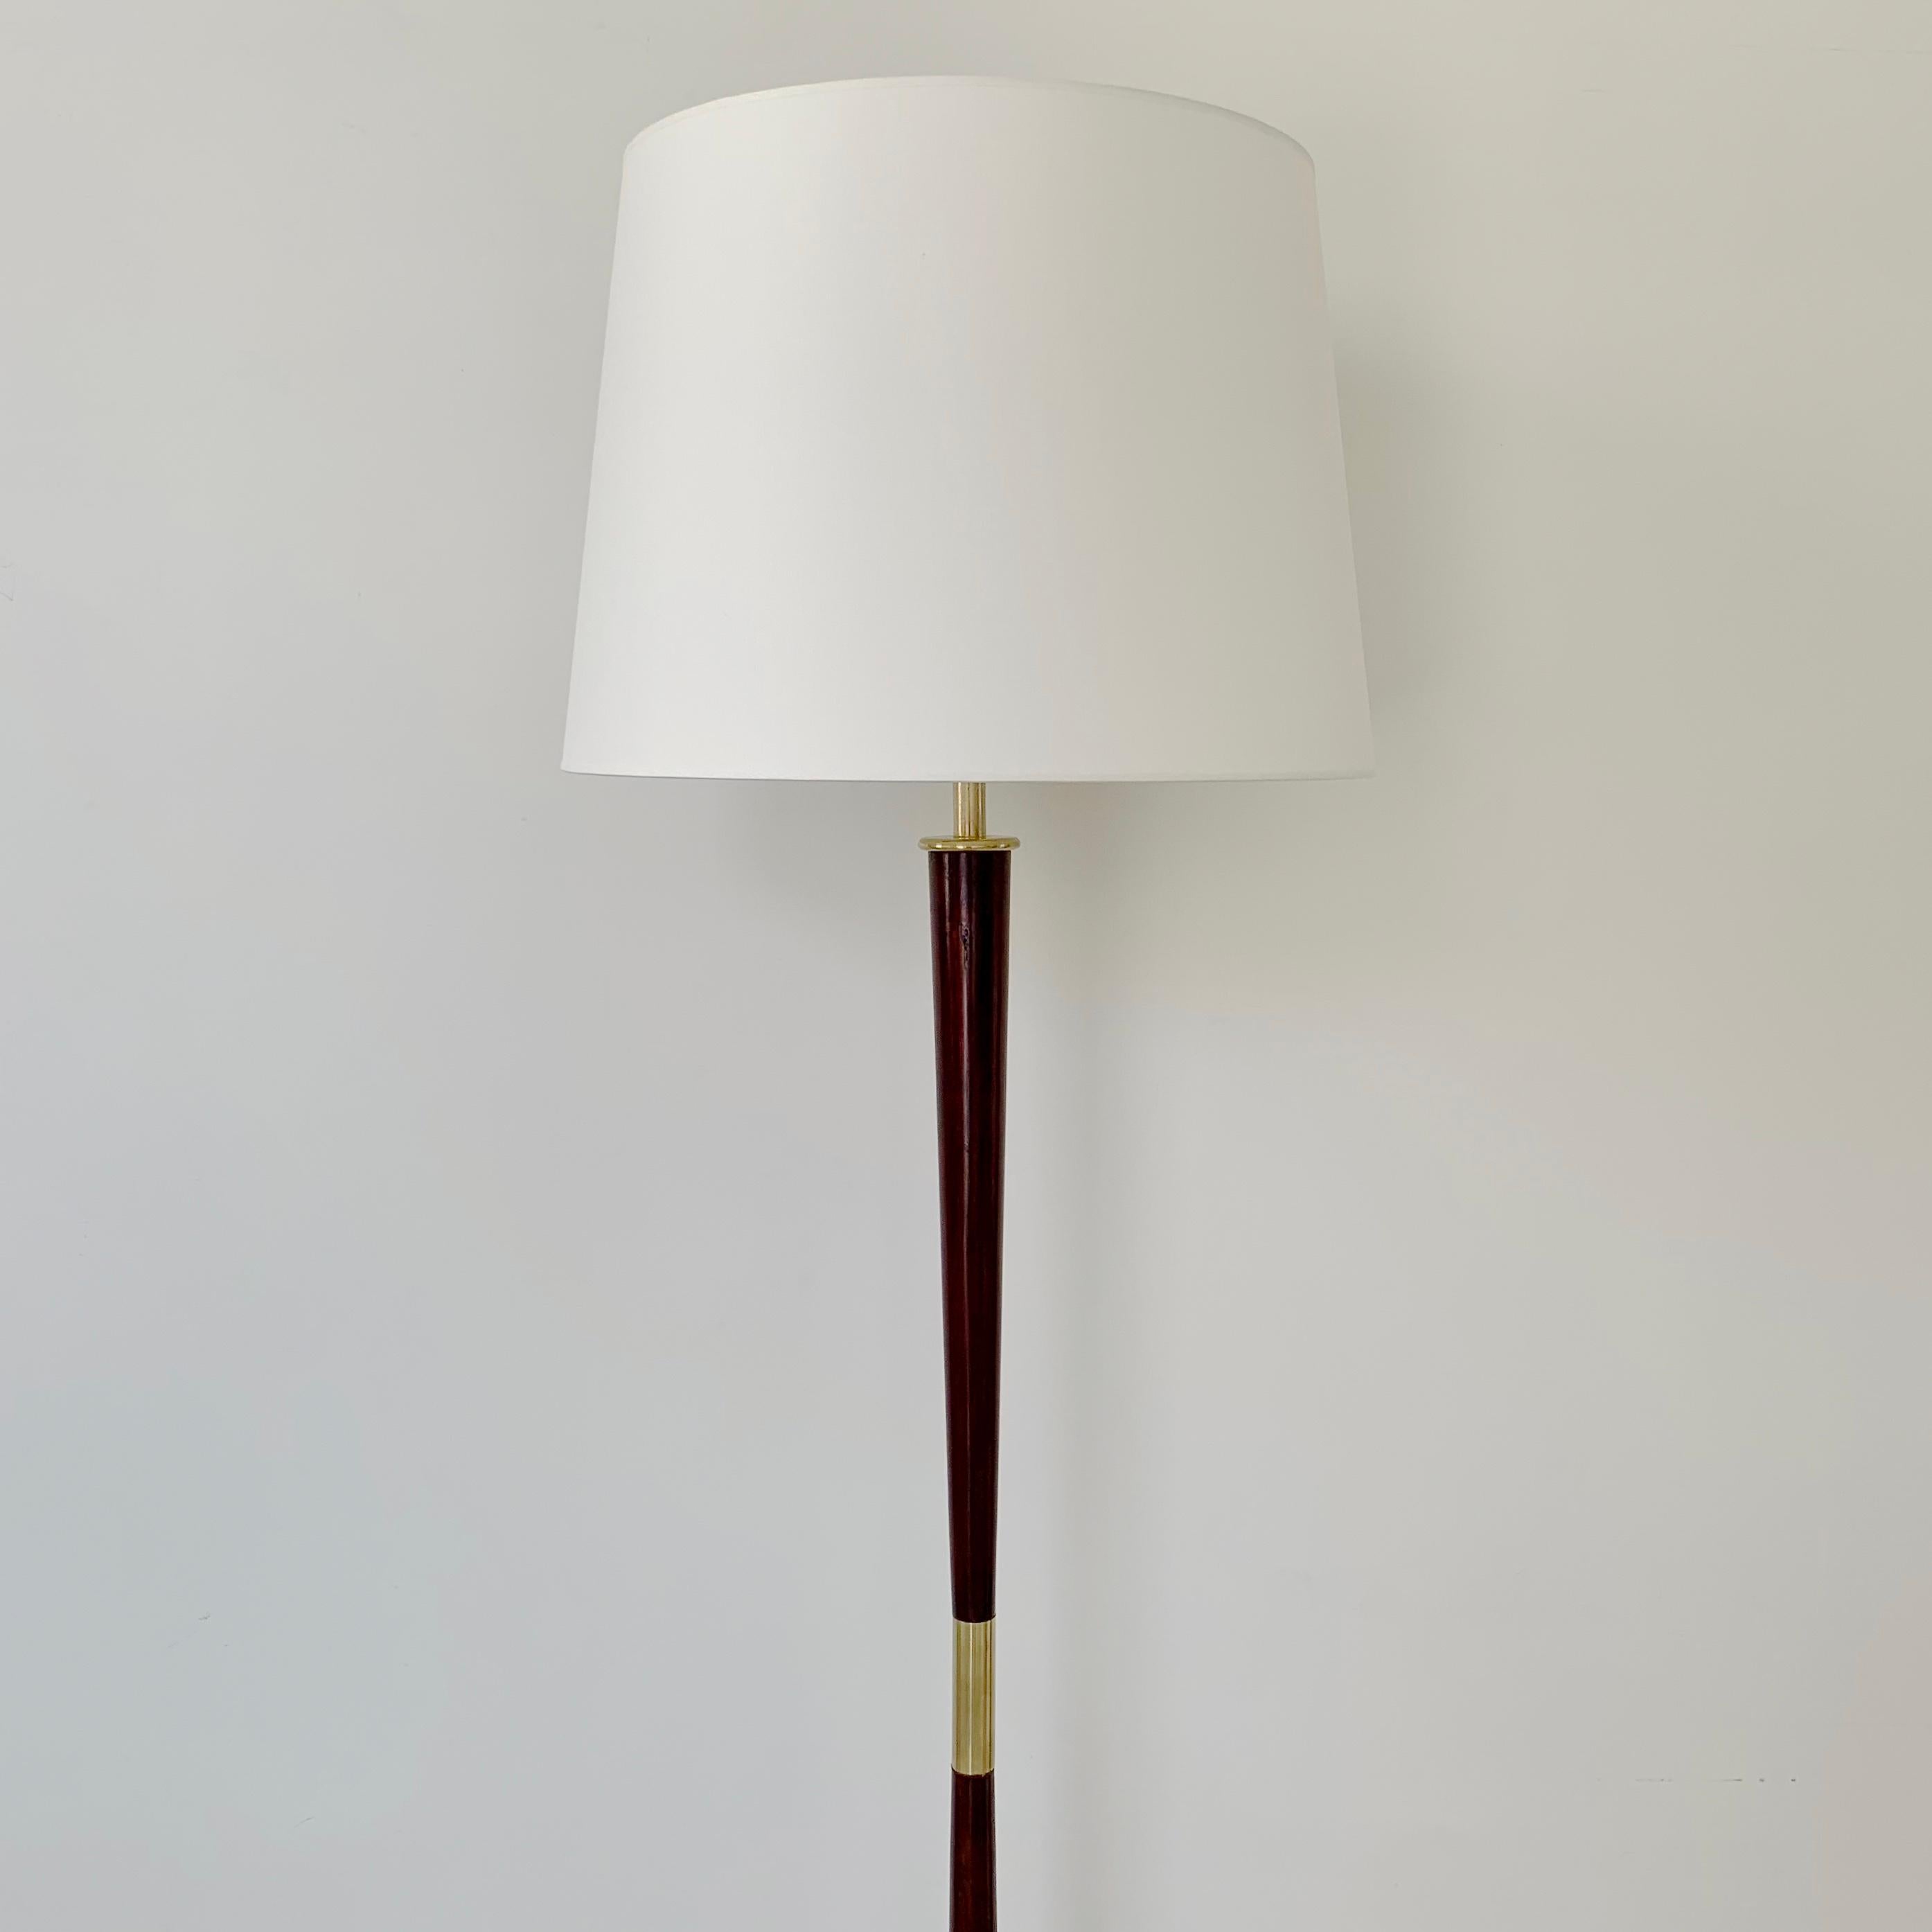 Stilnovo Documented Original Midcentury Floor Lamp, circa 1950, Italy In Good Condition For Sale In Brussels, BE